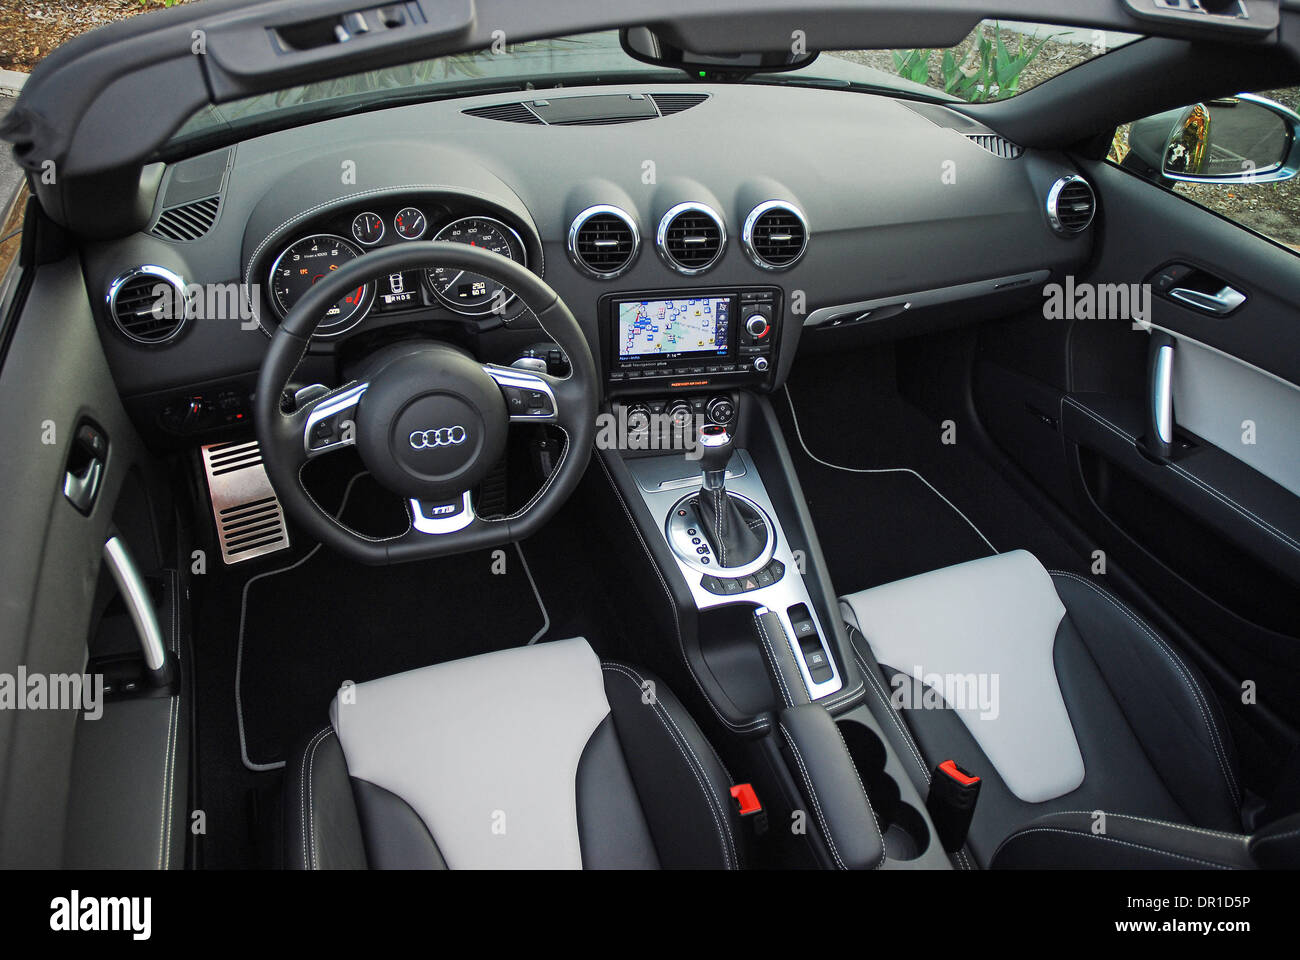 May 04, 2009 - Los Angeles, California, USA - Interior view of the 2009  Audi TTS Roadster. The Audi TTS is the top of the TT model line. It will be  coming